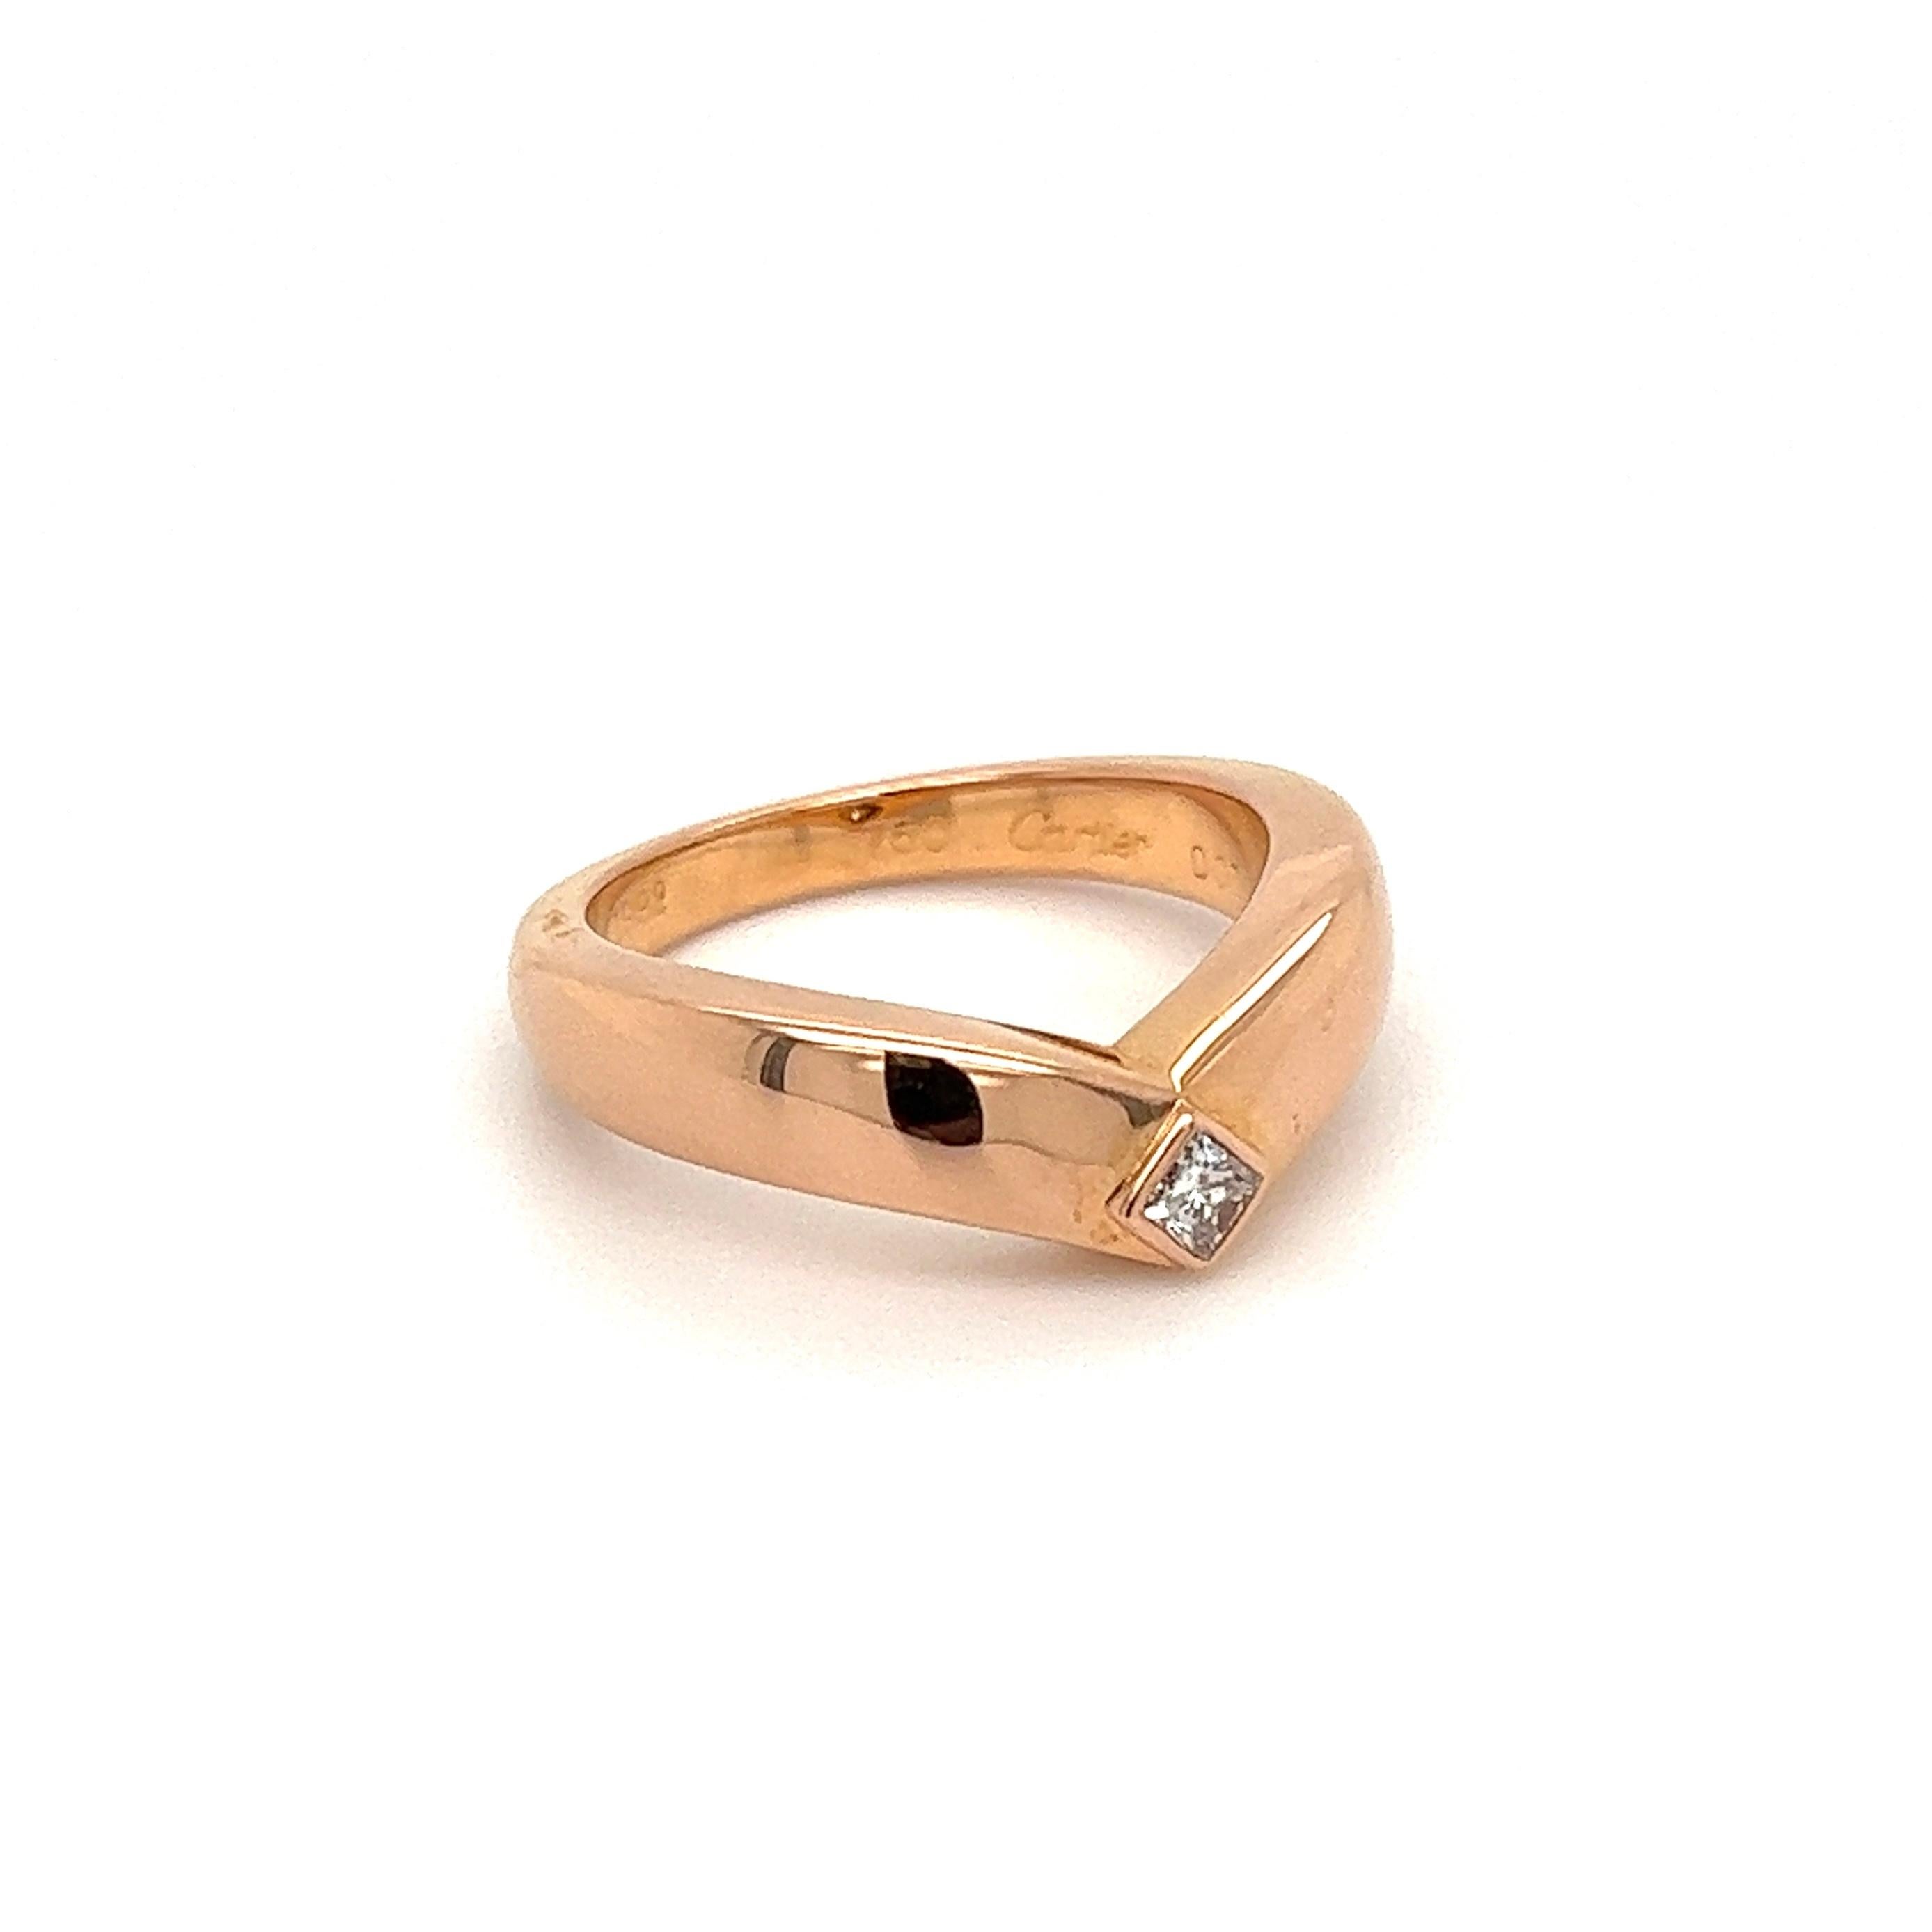 Simply Beautiful! Iconic Cartier! 18K Rose Gold V Band Ring. Ring size, 6.5, we offer ring resizing. Measuring approx. 0.90” x 0.87” x 0.28. Marked:  CARTIER DO7 643, 750. Chic and Classic… Ideal worn alone or as an alternative Engagement